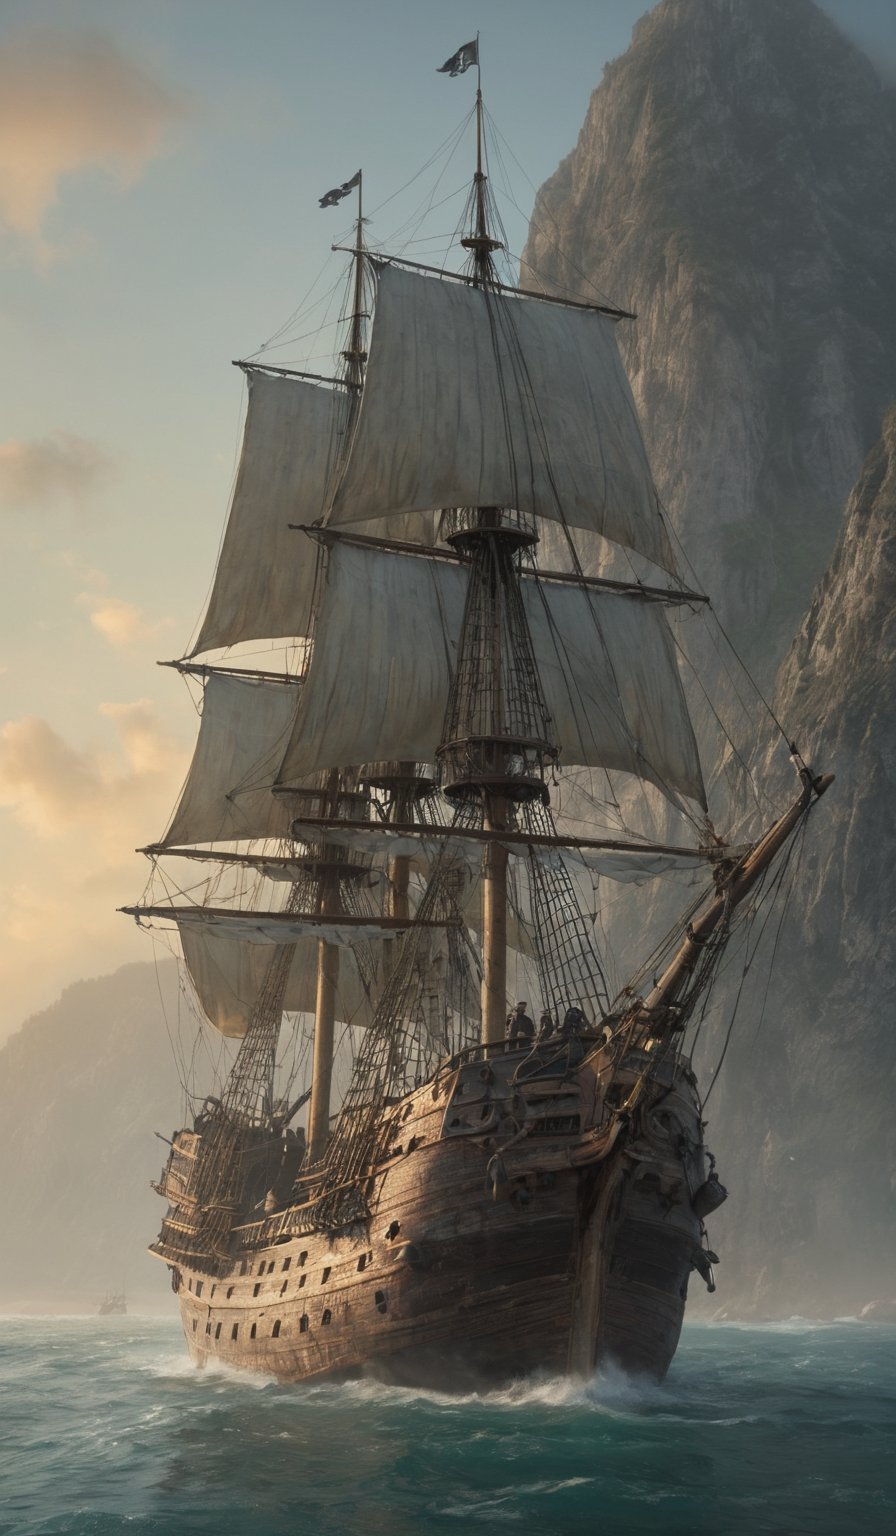 A worn, pirate ship with sails-of-the-line dominates the frame, its weathered hull a testament to years at sea. , highlighting dirt-covered equipment and tattered sails stained white with grime. A breathtaking sunset behind the vessel casts gentle shadows, imbuing the scene with an ethereal ambiance. Soft hues of blue, gray, and green predominate, punctuated by rusty orange-yellows and teal accents on the ship's worn features. The background transitions seamlessly from the sharp focus on the ship to a loose, impressionistic mountainscape, its indistinct forms shrouded in mist. Muted brushstrokes add depth and movement, while hazy lighting creates a dystopian atmosphere.